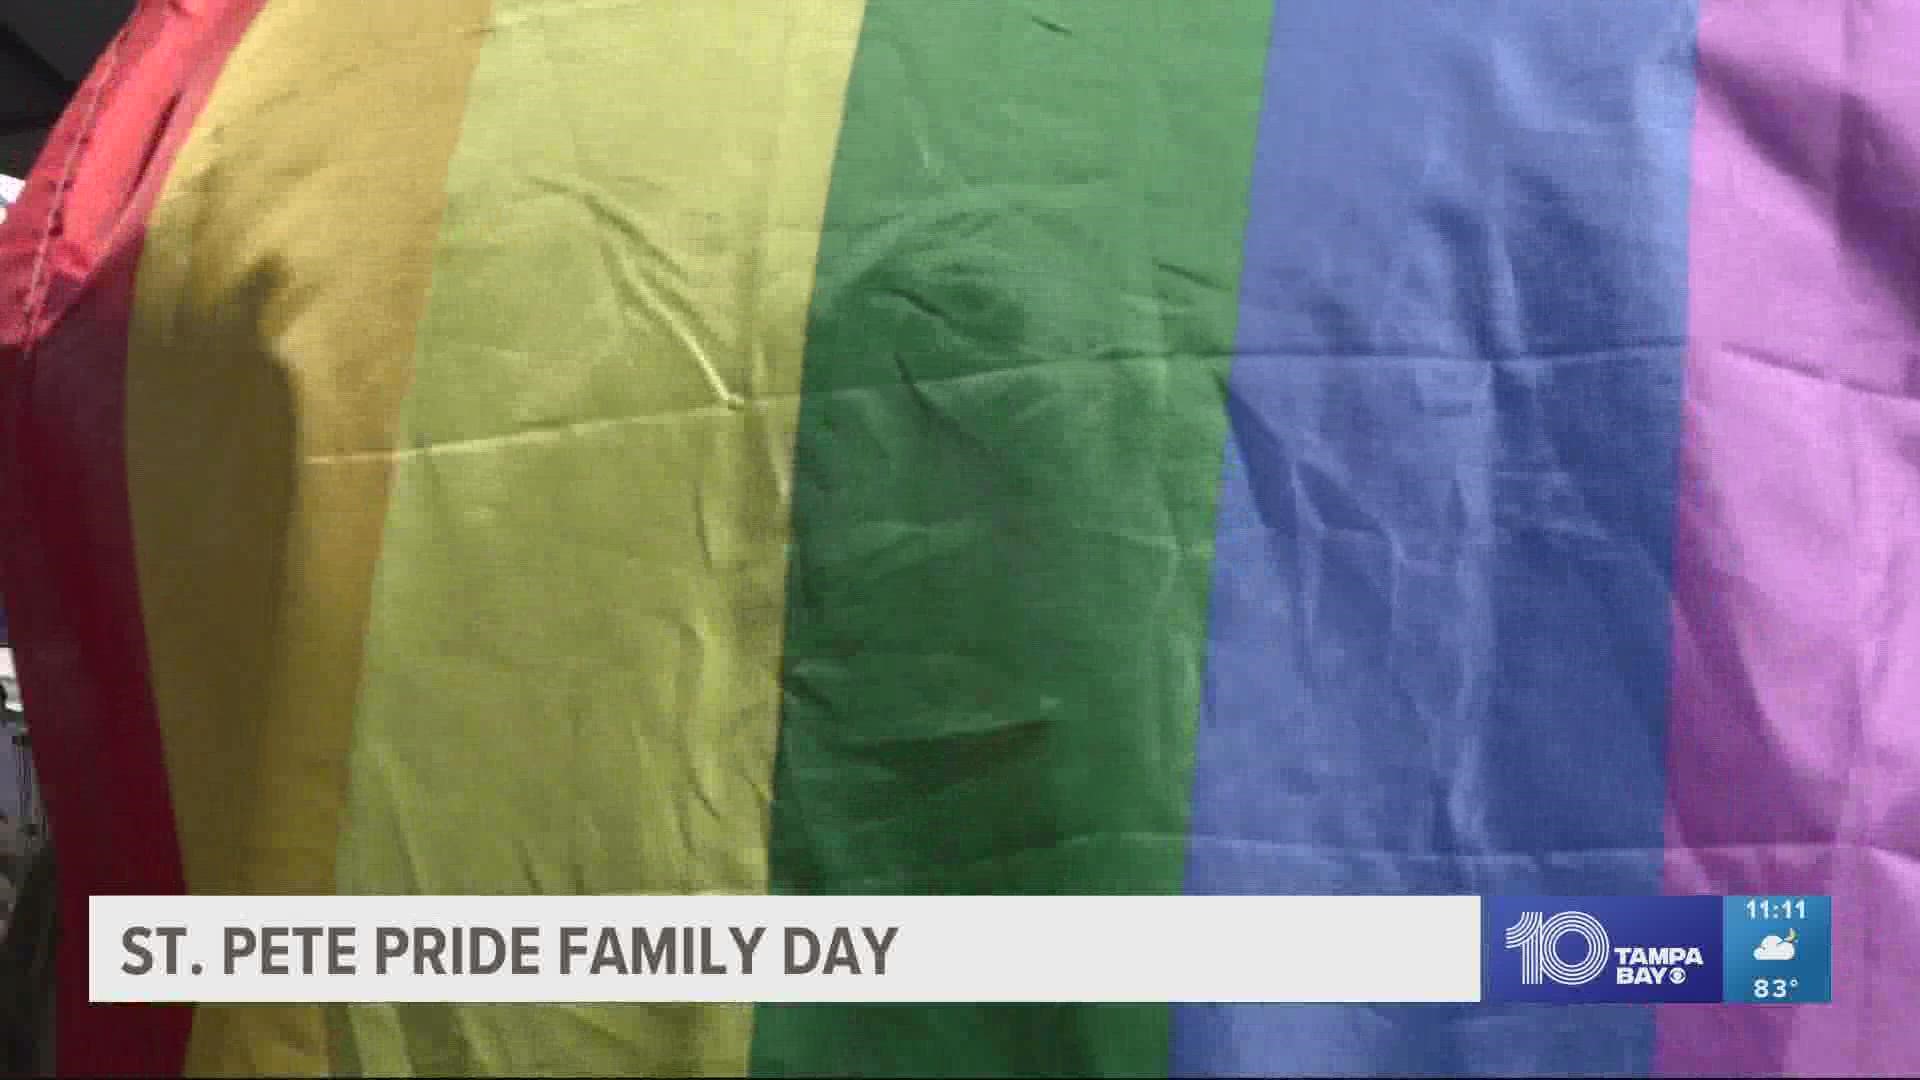 The event was catered toward LGBTQ+ youth, families and allies. Families that attended hoped kids were able to see how different families can look.